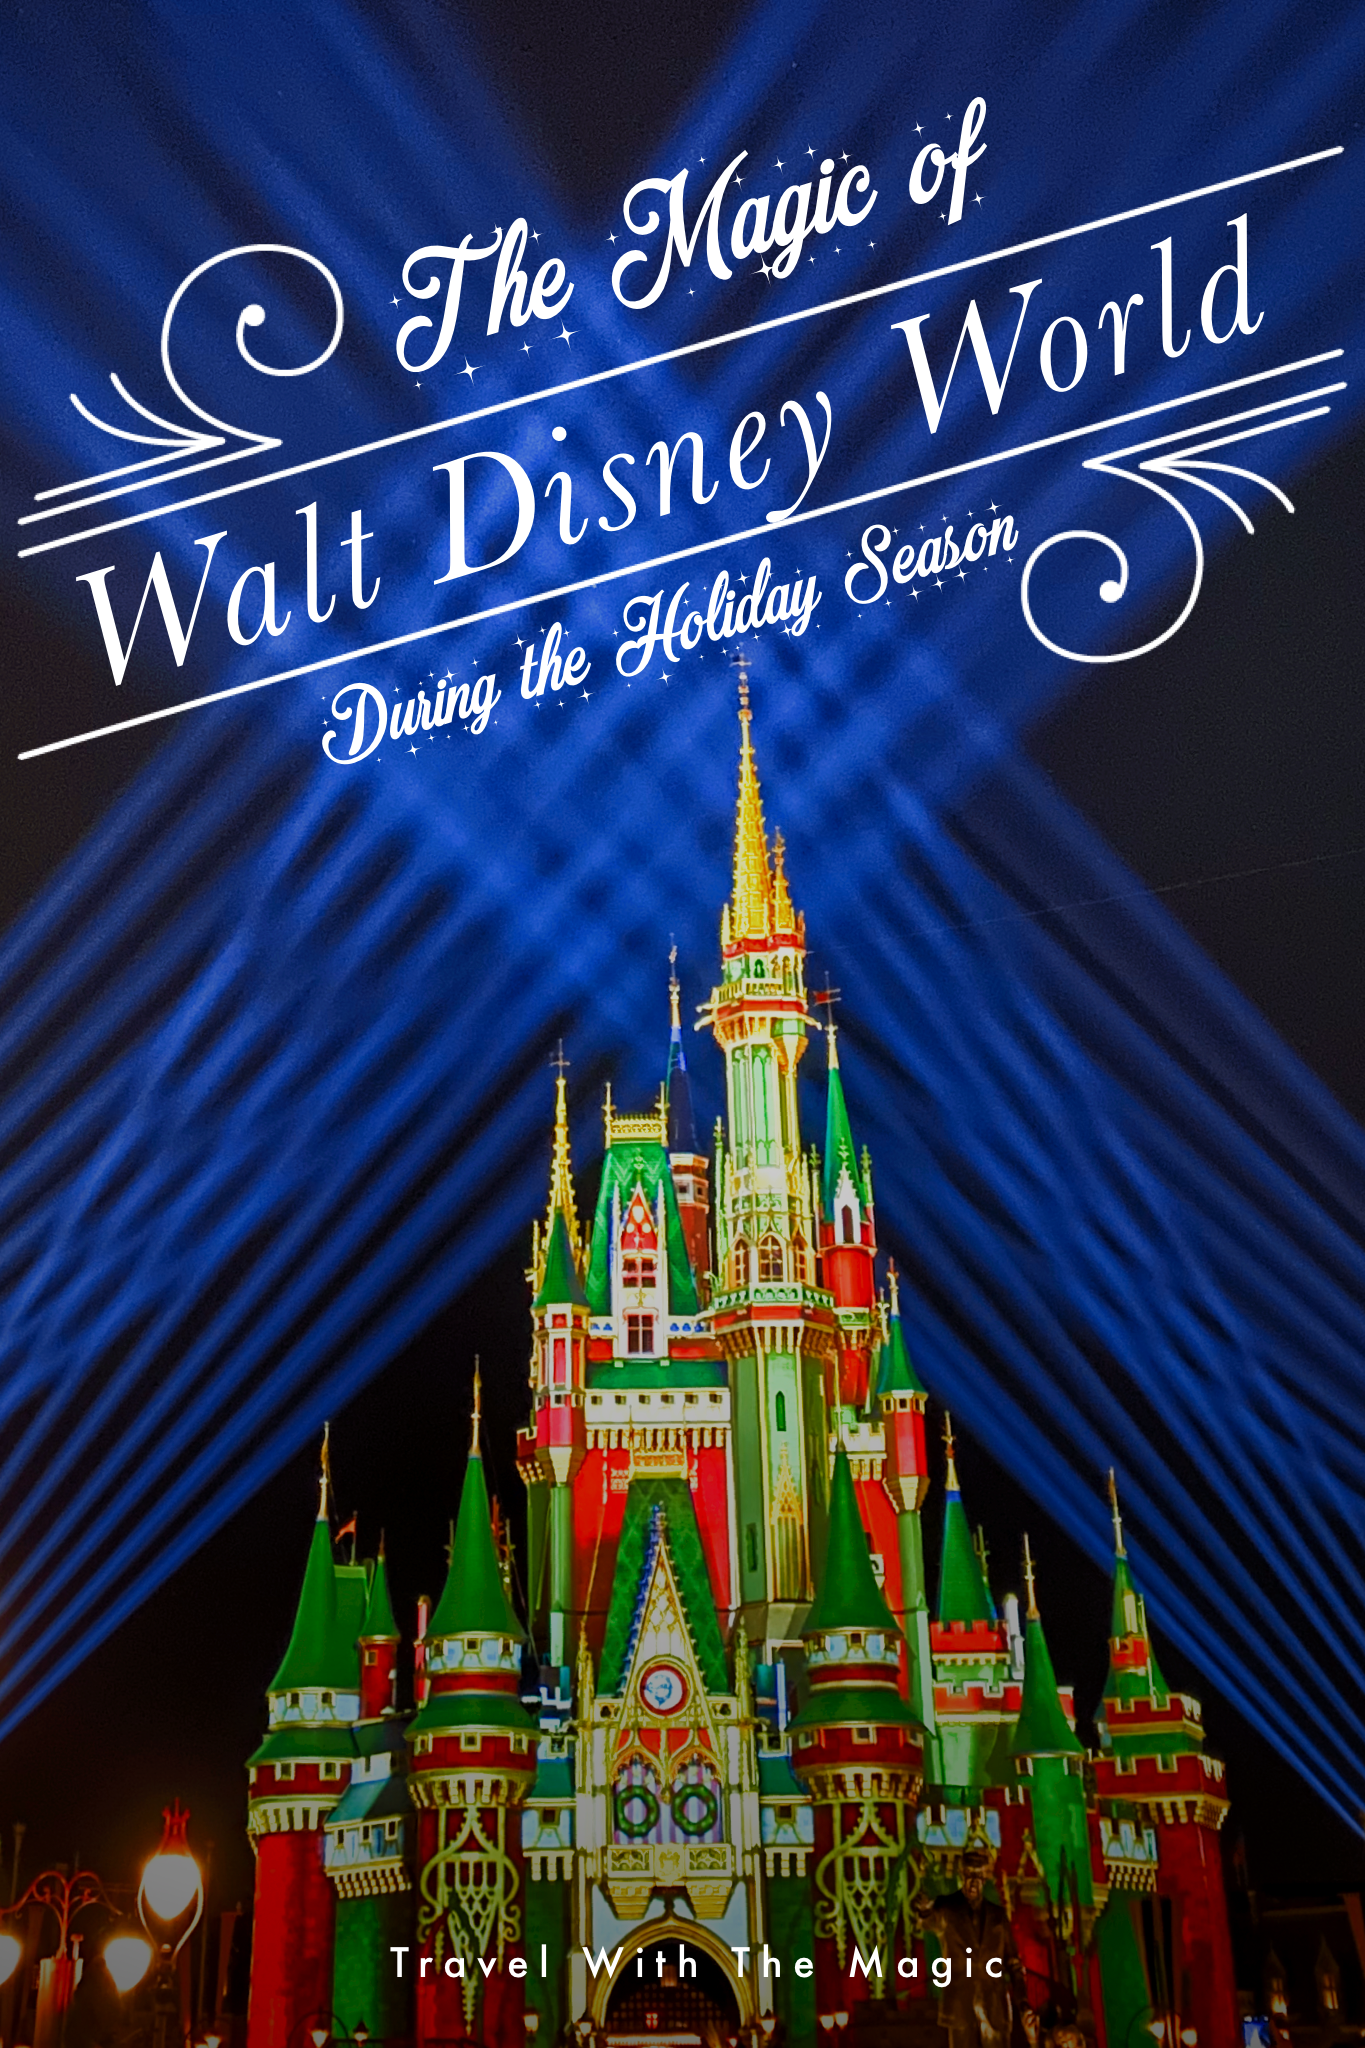 The Magic of Walt Disney World During the Holiday Season Travel With